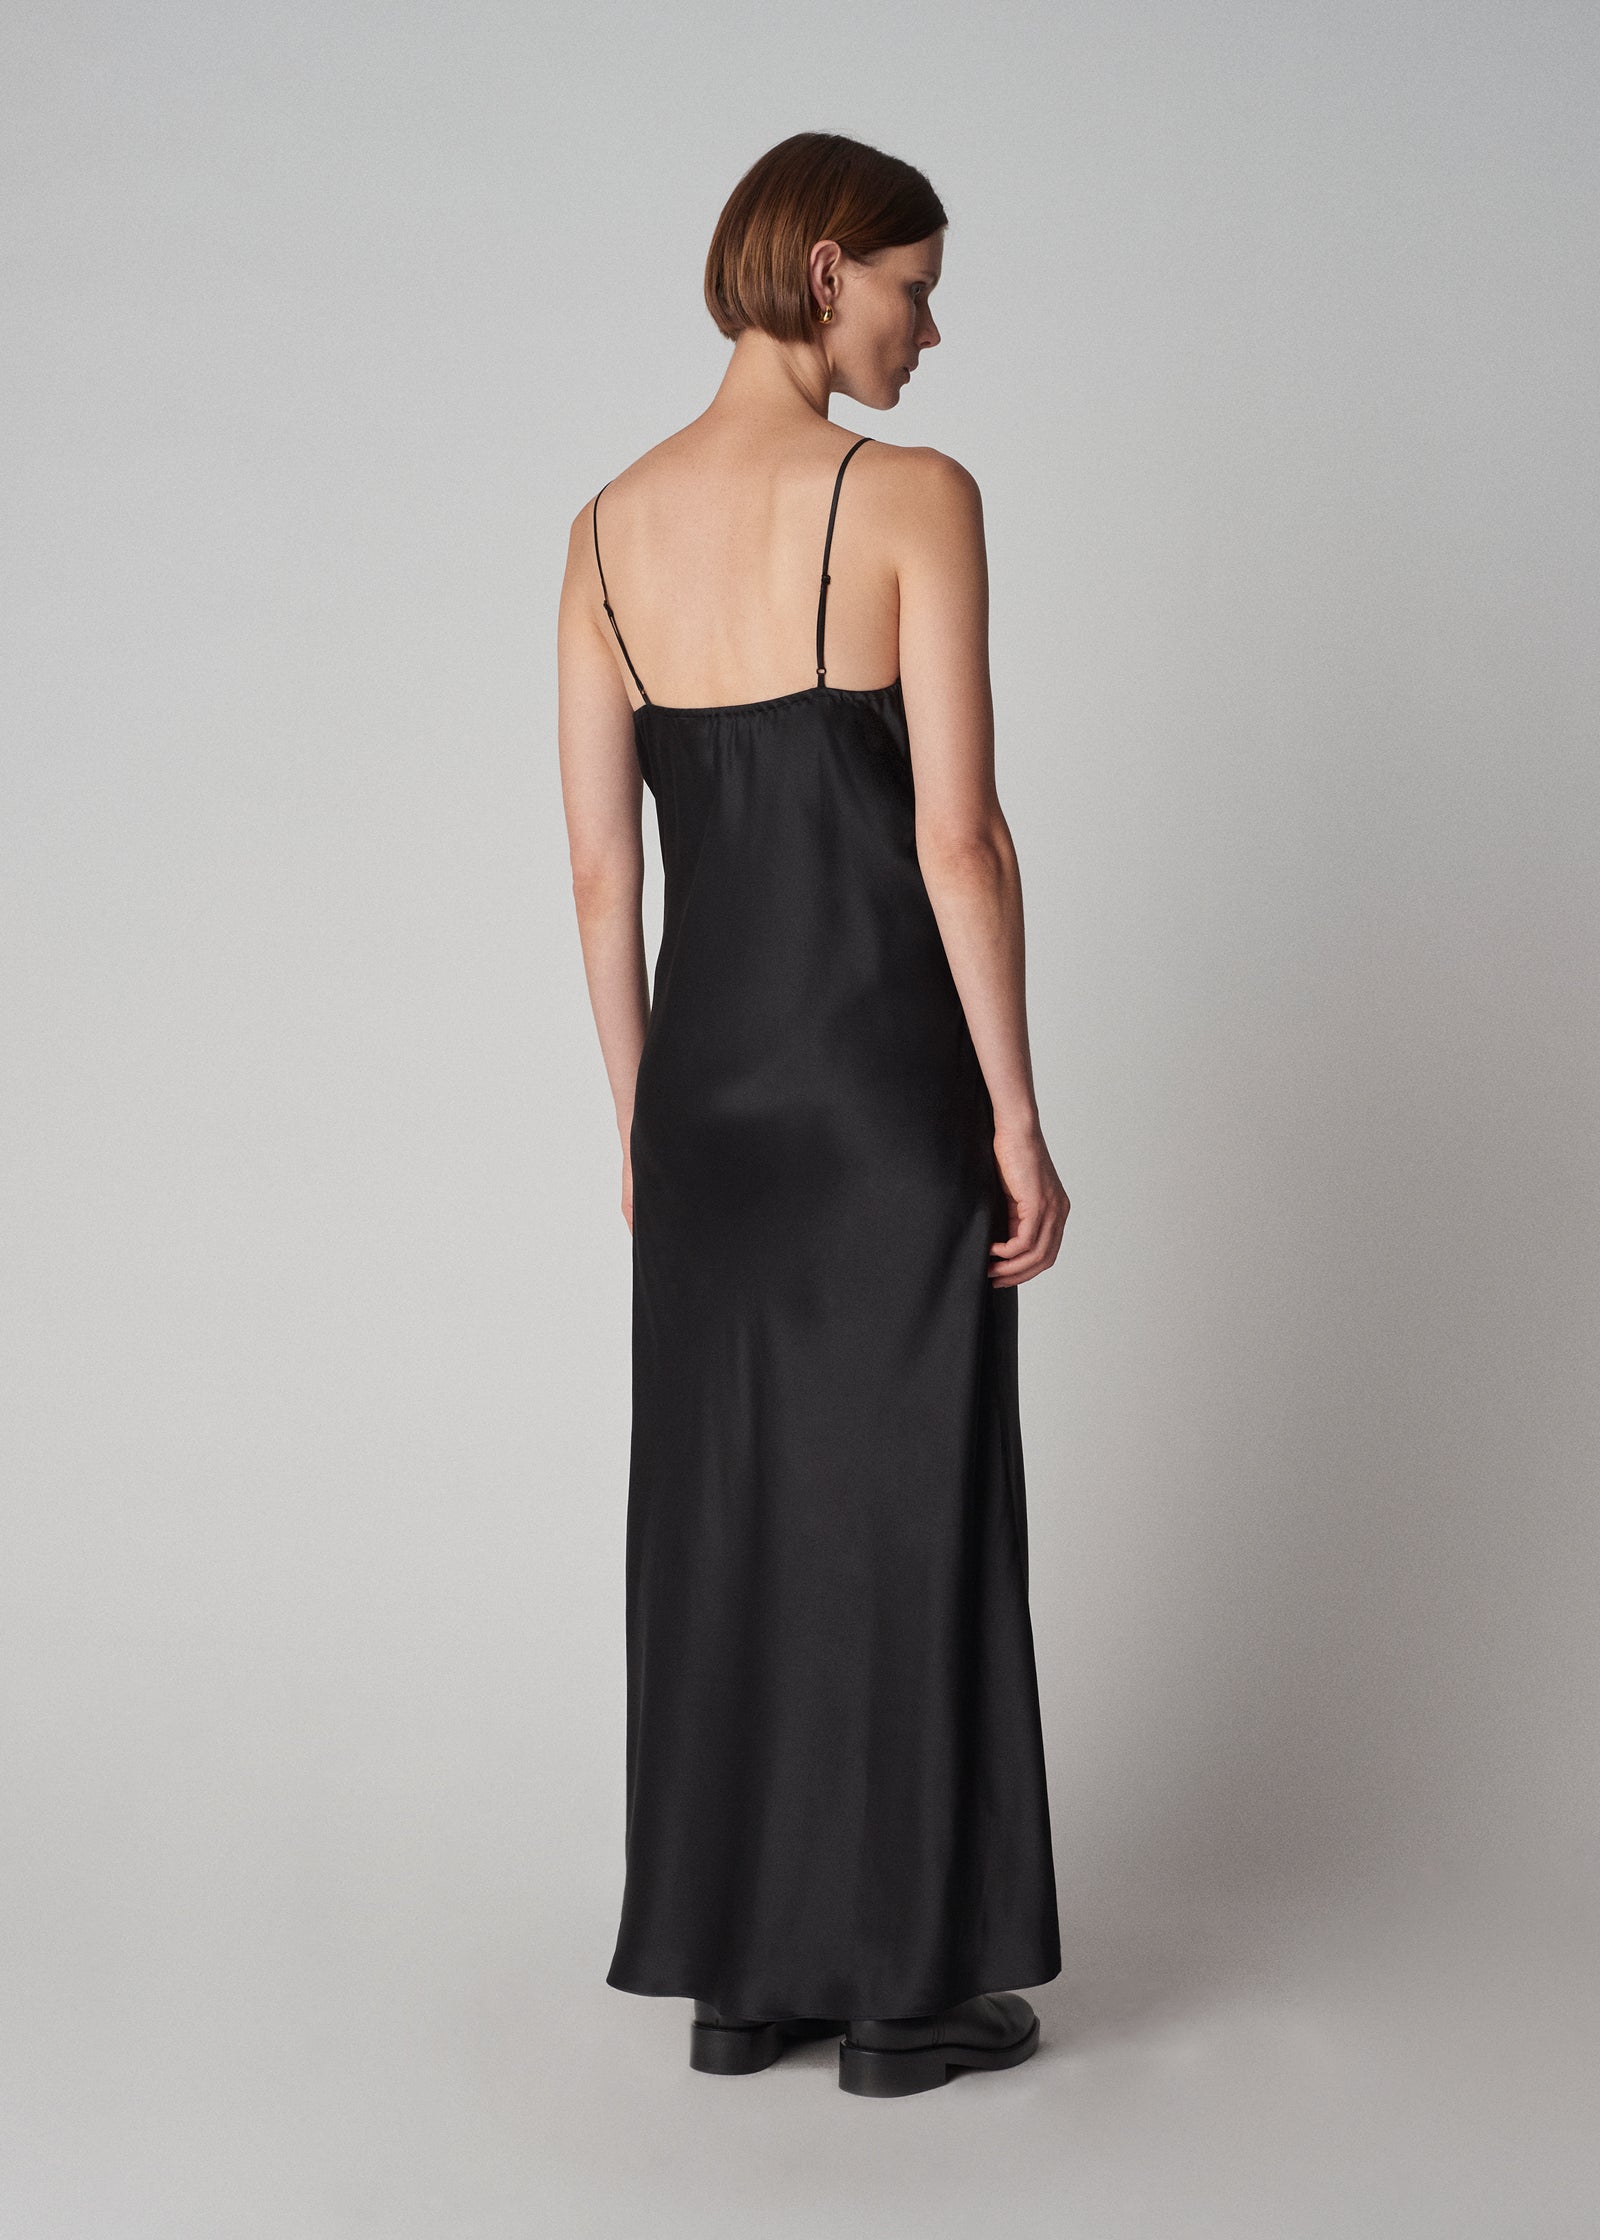 Lace Slip Dress in Silk Satin - Black - CO Collections